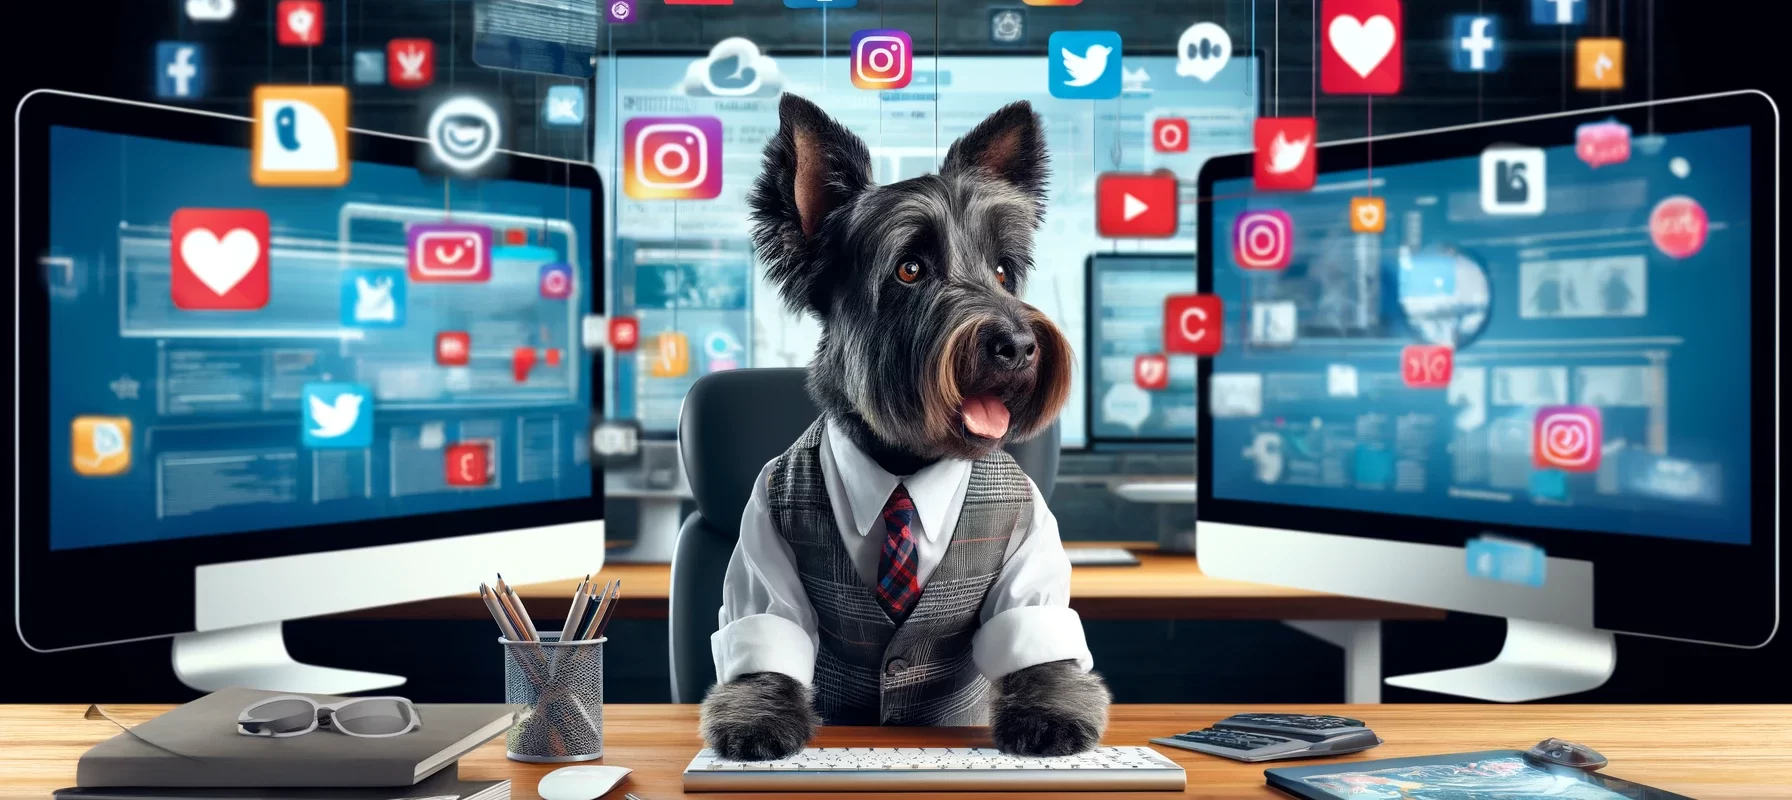 A Scottish Terrier dressed as a social media manager, working at a desk surrounded by screens with social media feeds, symbolizing expertise in digital marketing.